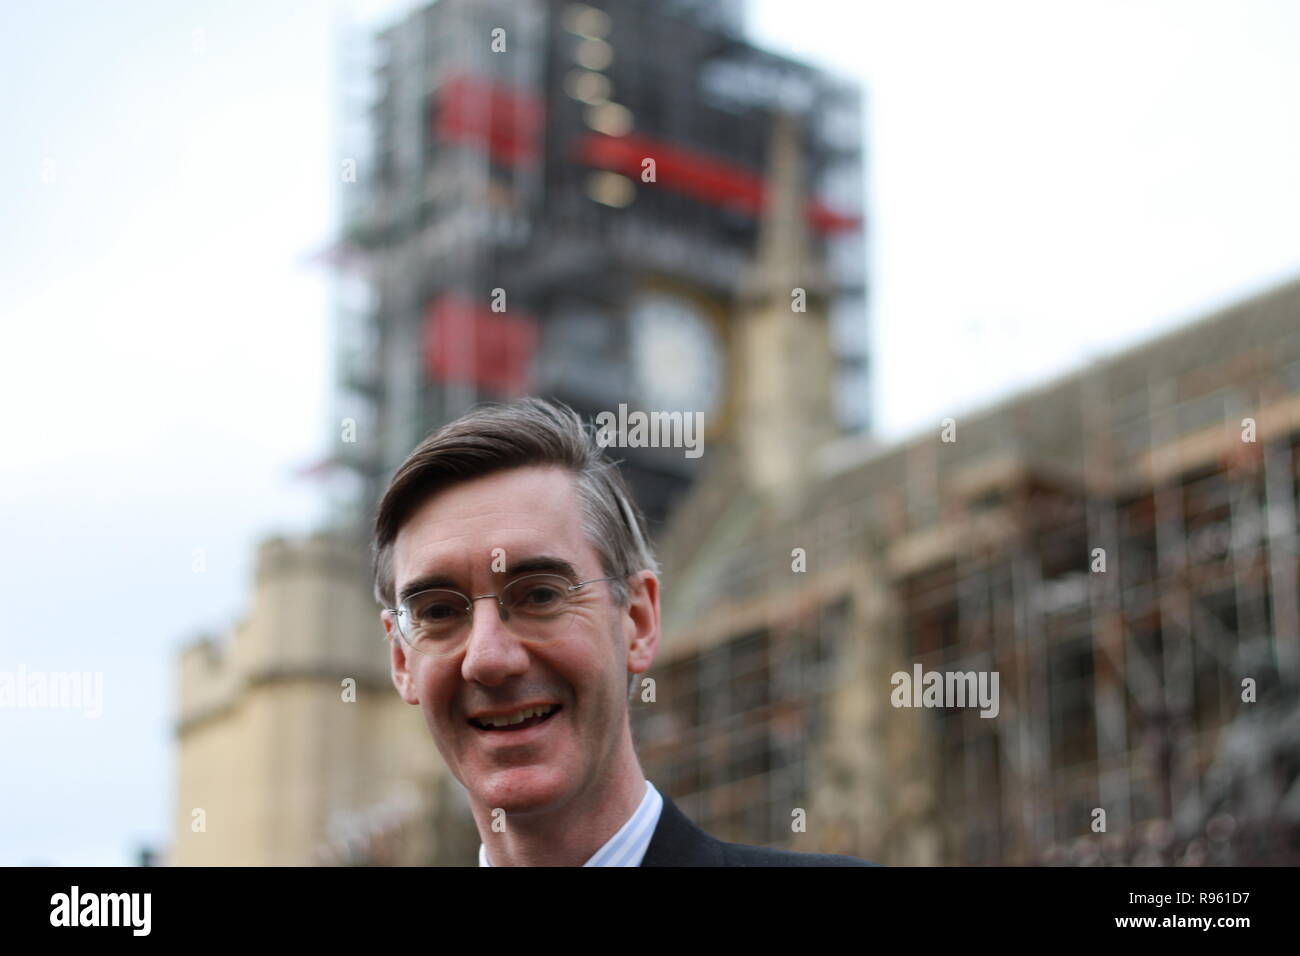 Jacob Rees-Mogg standing outside parliament, Westminster, London UK on 17th April 2018. Jacob gave his consent for these photographs to be taken. European research group. ERG. Russell Moore portfolio page. Stock Photo